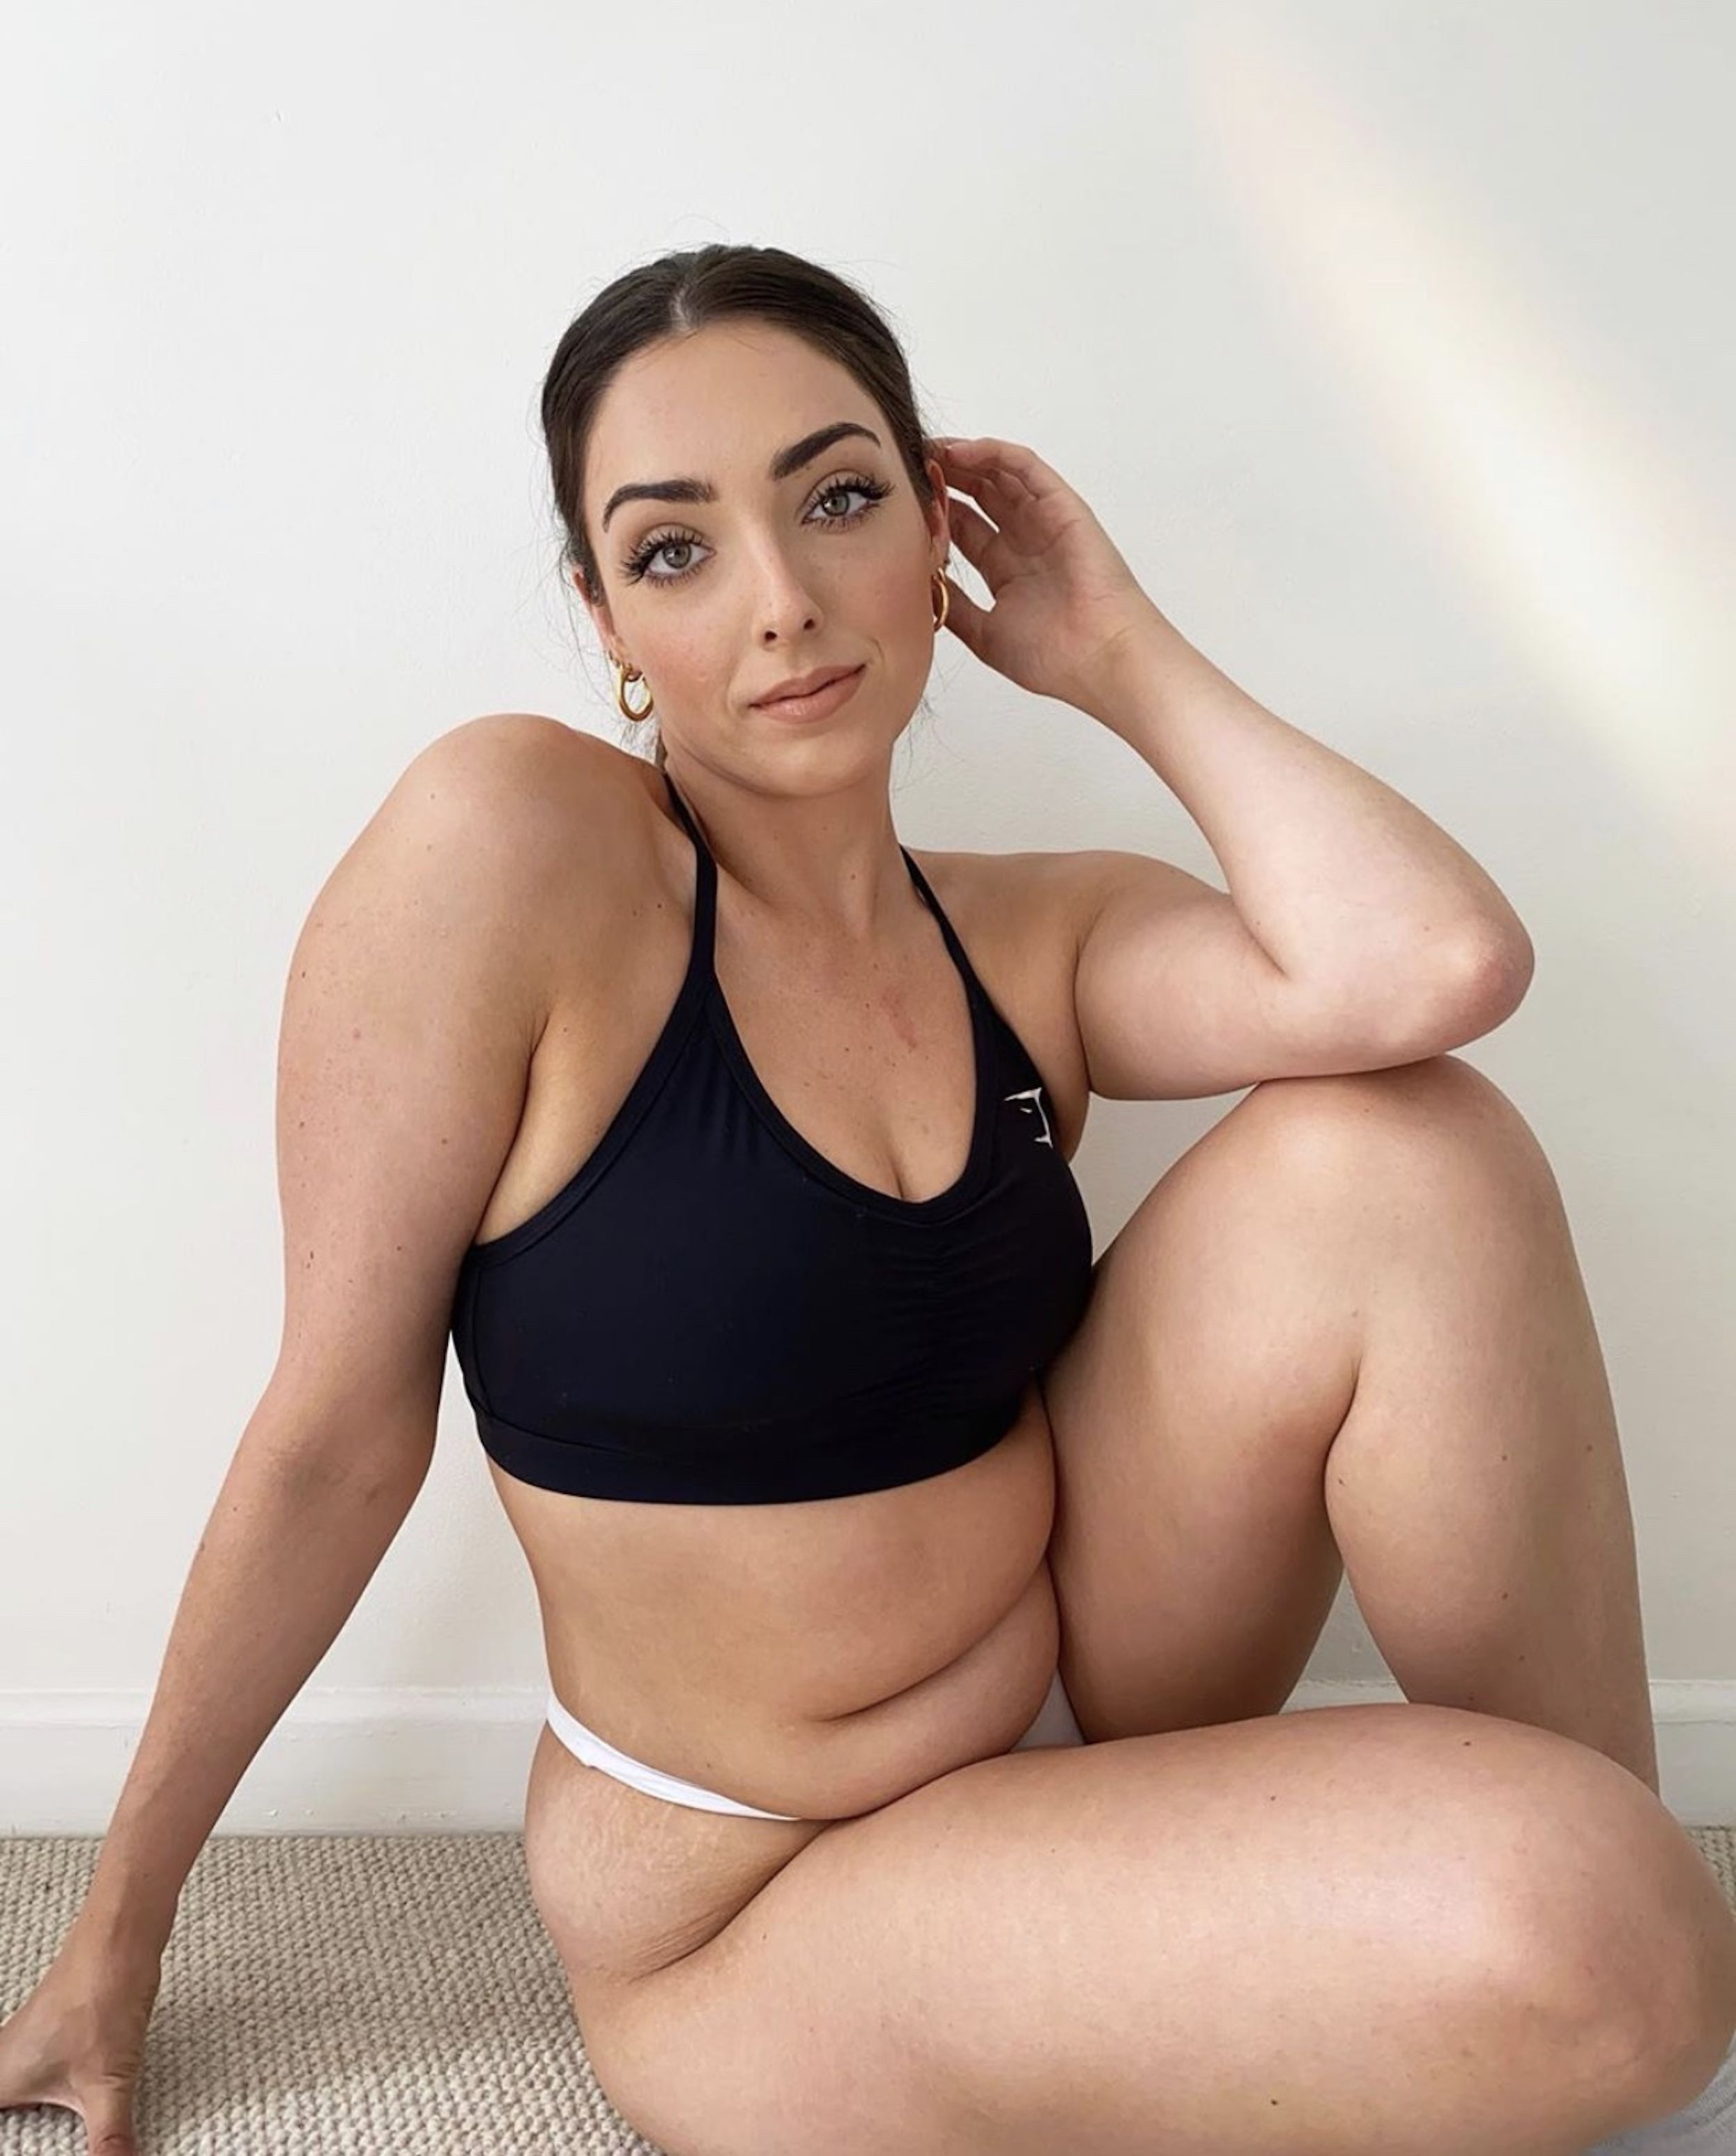 Nelly London Influencer Profile - Work With Influencer Nelly London